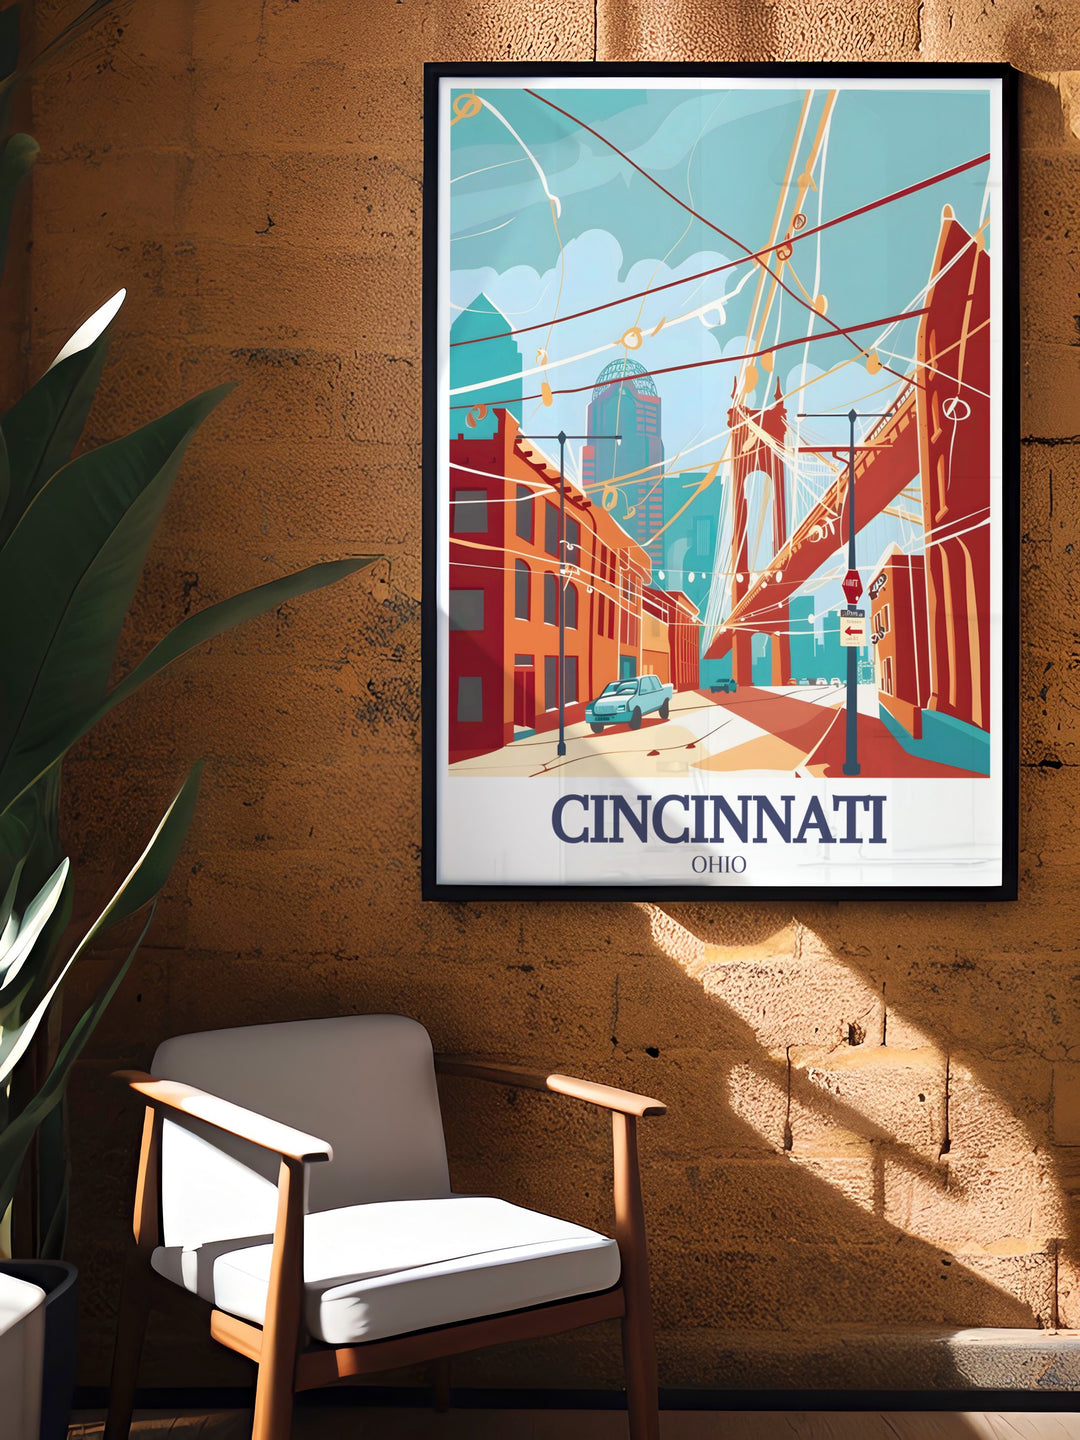 High quality Cincinnati map and painting of Roebling Suspension Bridge Roebling Point printed on premium paper with fade resistant inks ensuring longevity and vibrant colors for years to come